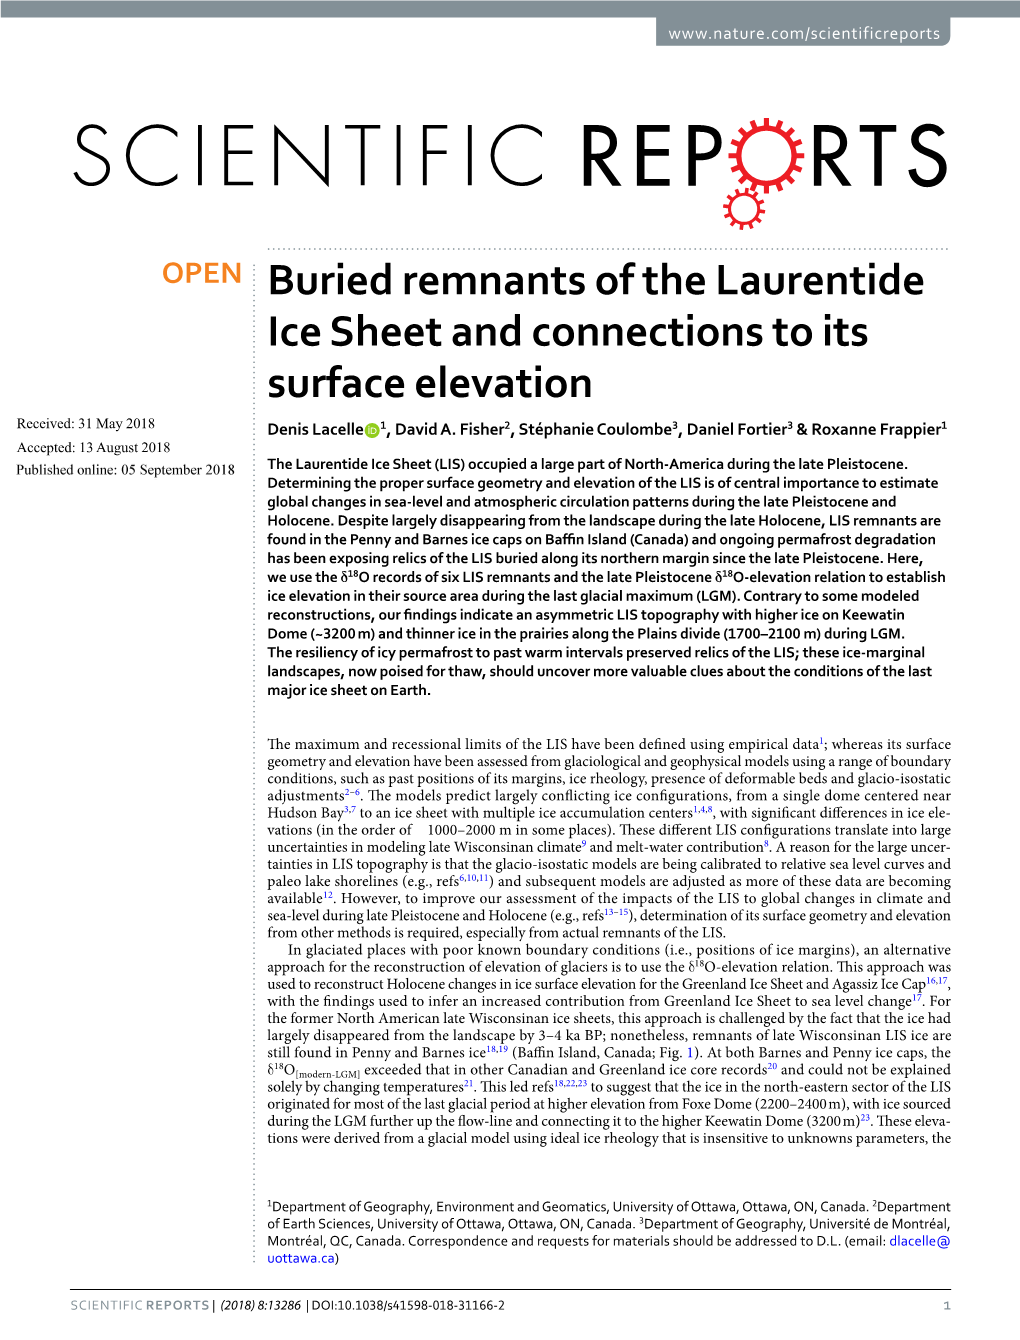 Buried Remnants of the Laurentide Ice Sheet and Connections to Its Surface Elevation Received: 31 May 2018 Denis Lacelle 1, David A